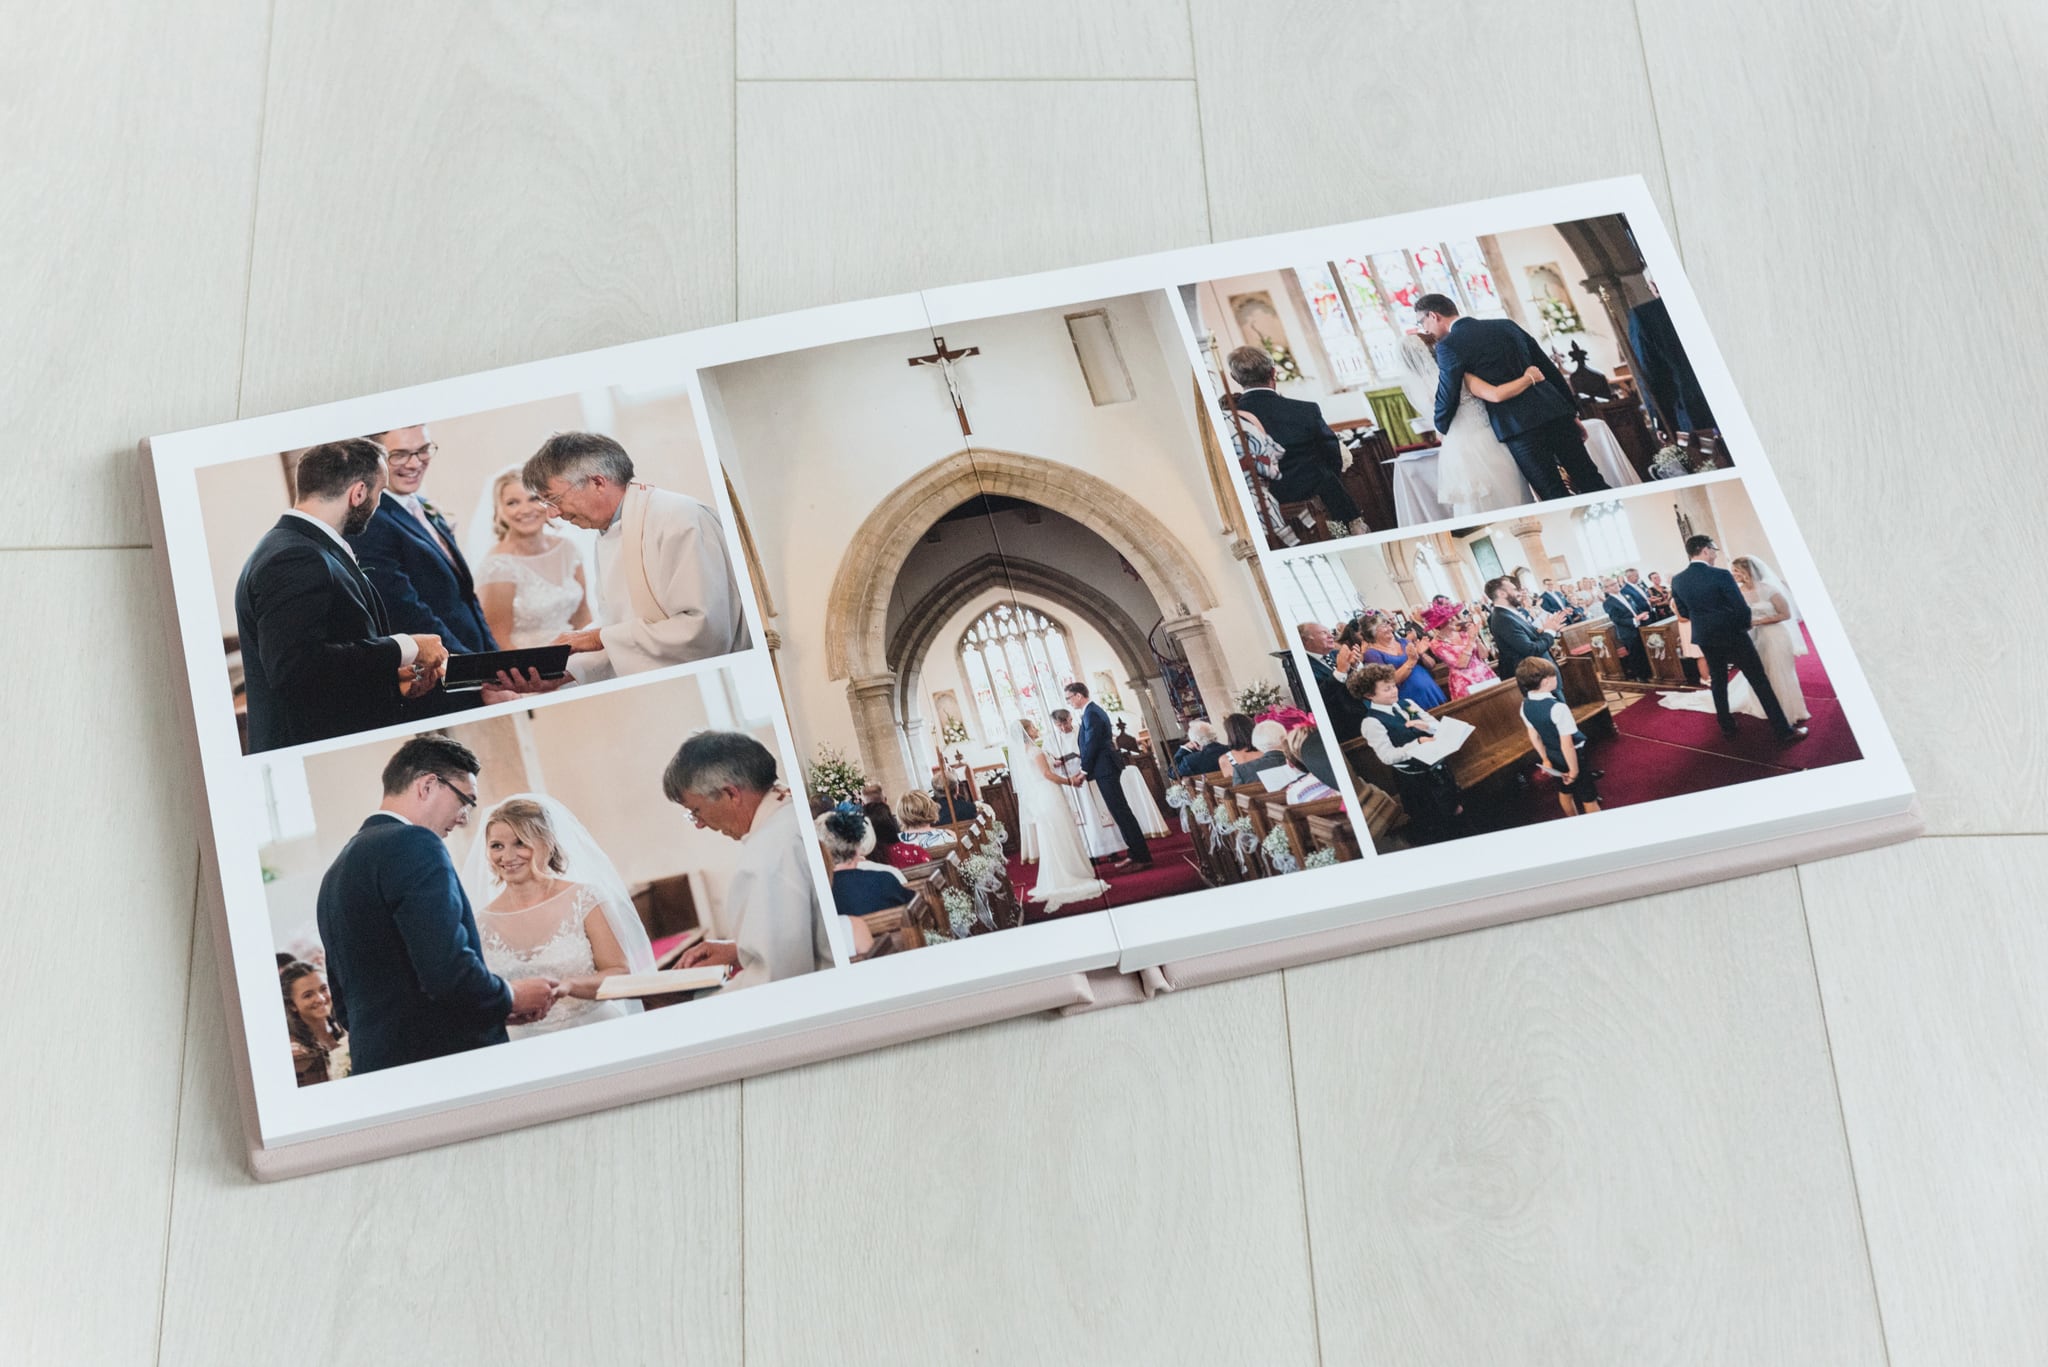 A fine art wedding album opened up and laid on a white wooden floor